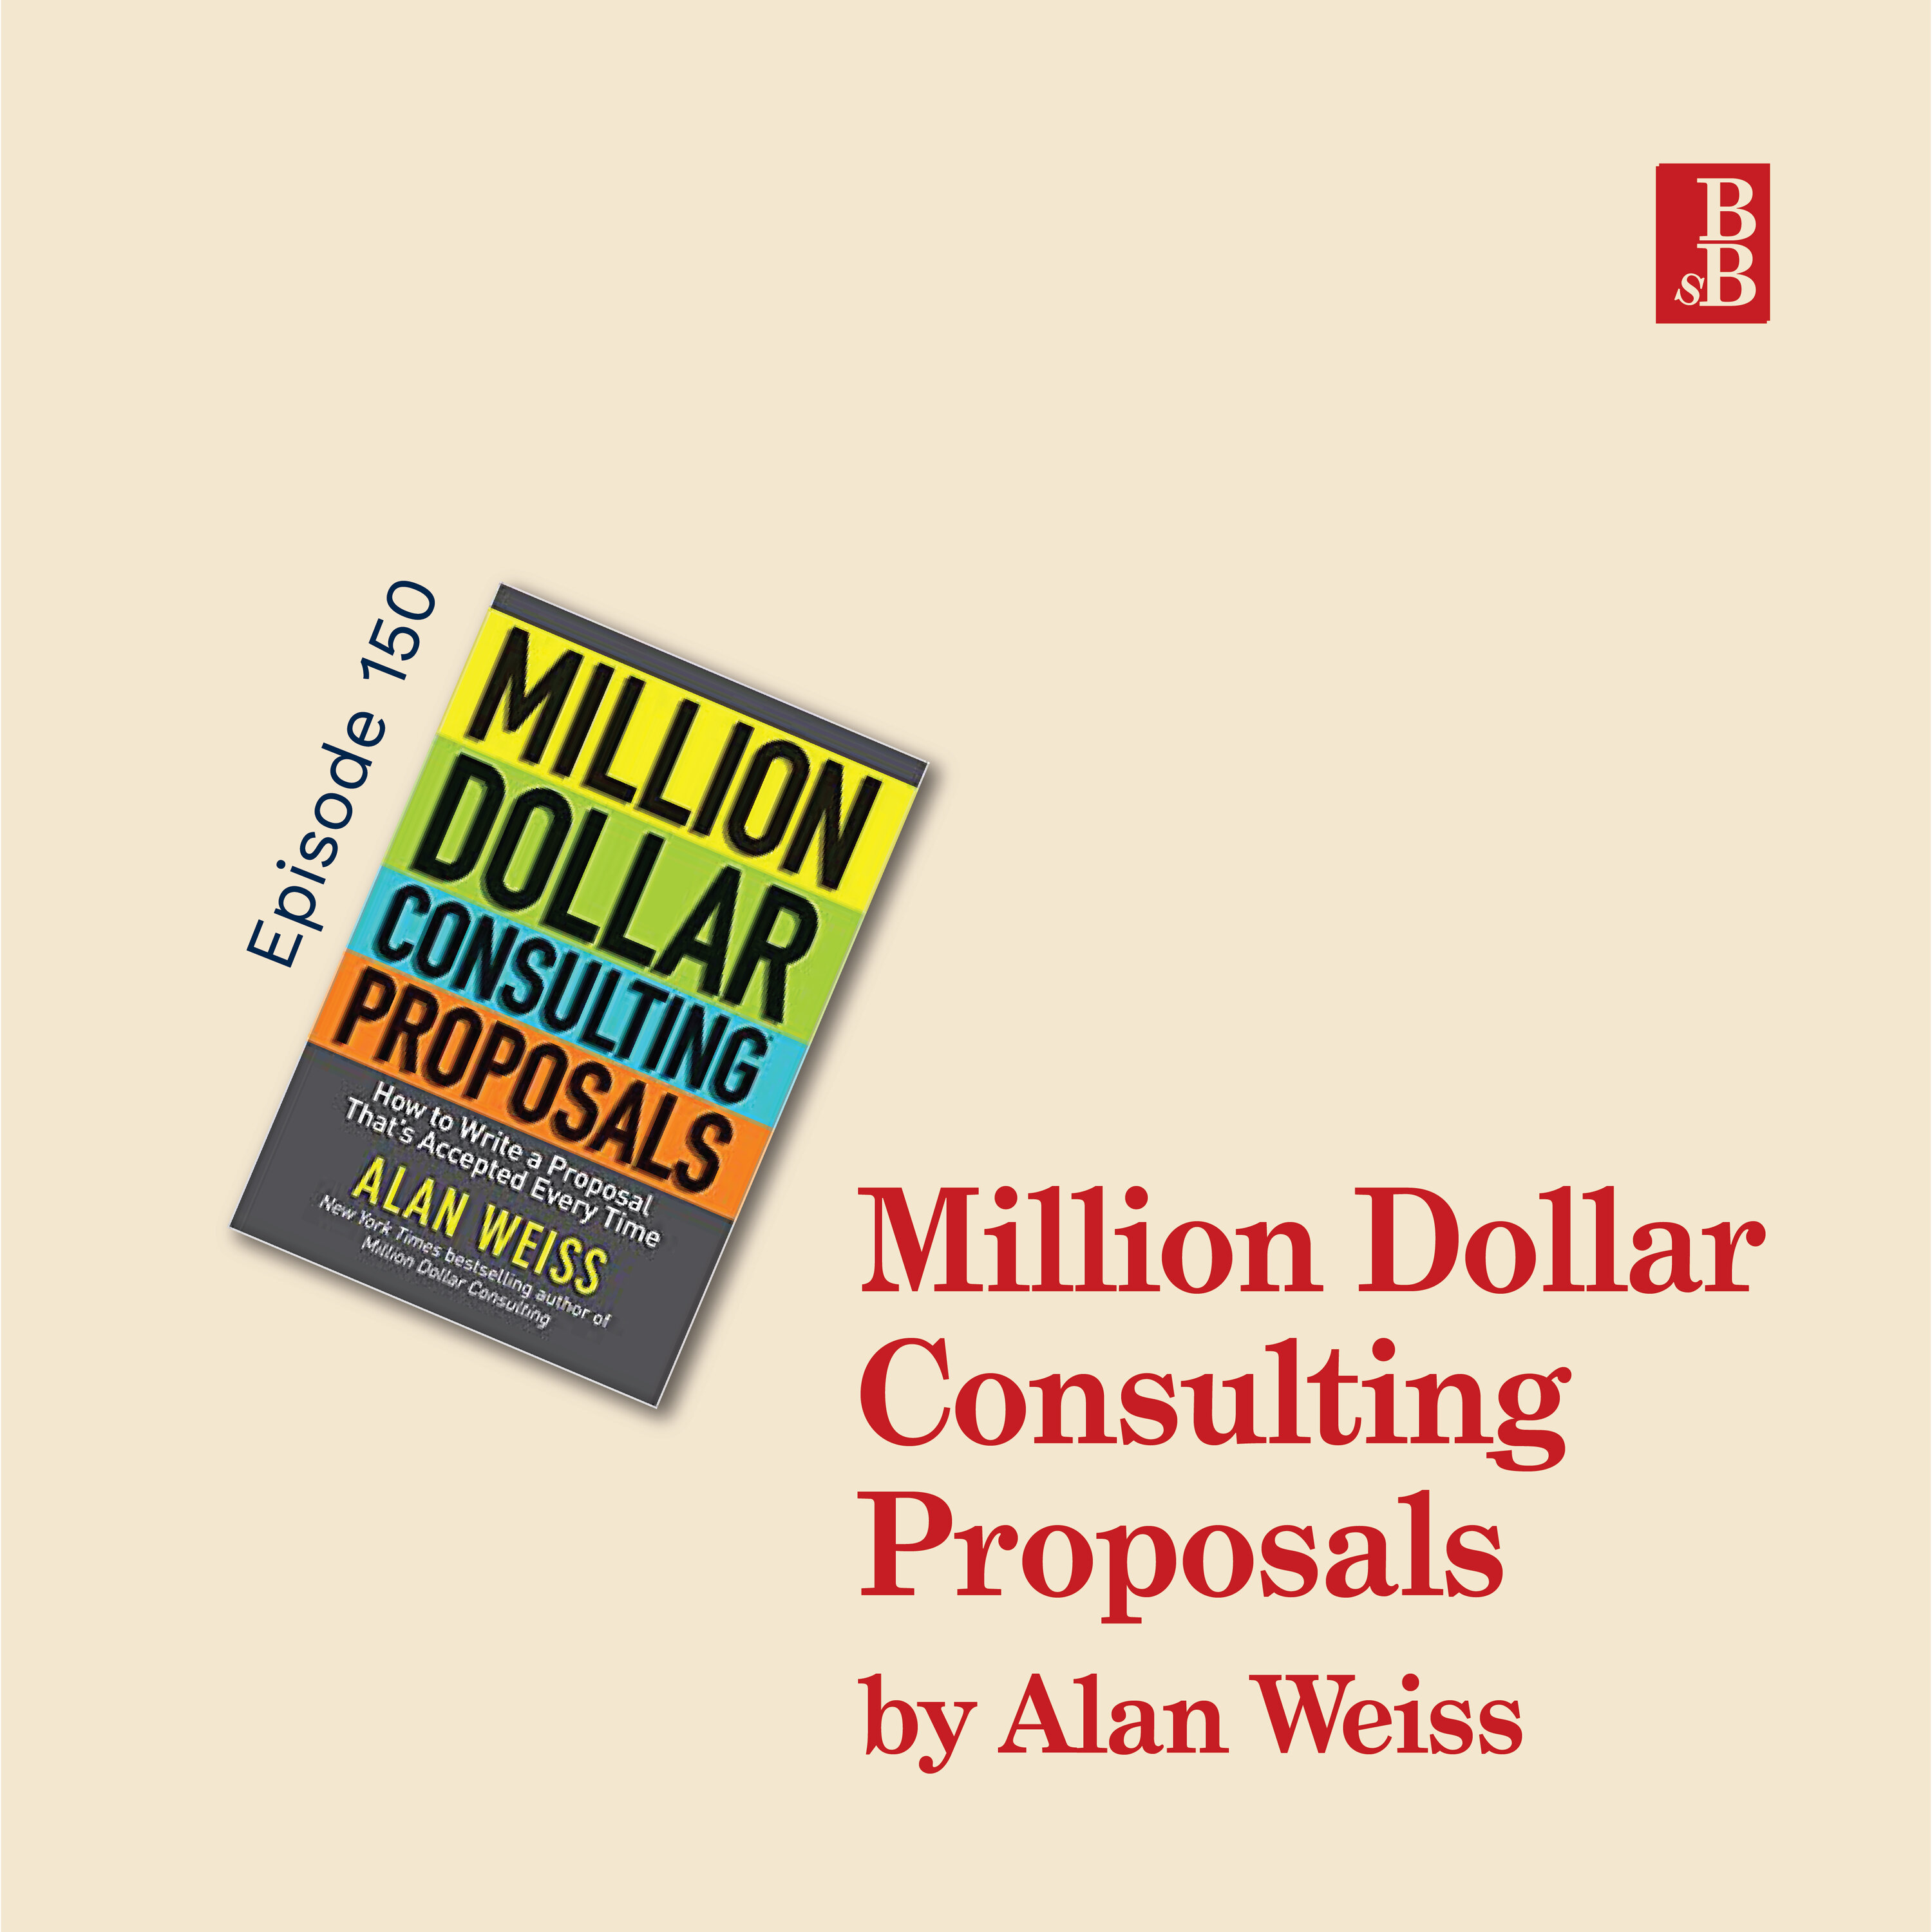 Million Dollar Consulting Proposals by Alan Weiss: how to get around the gatekeepers Image